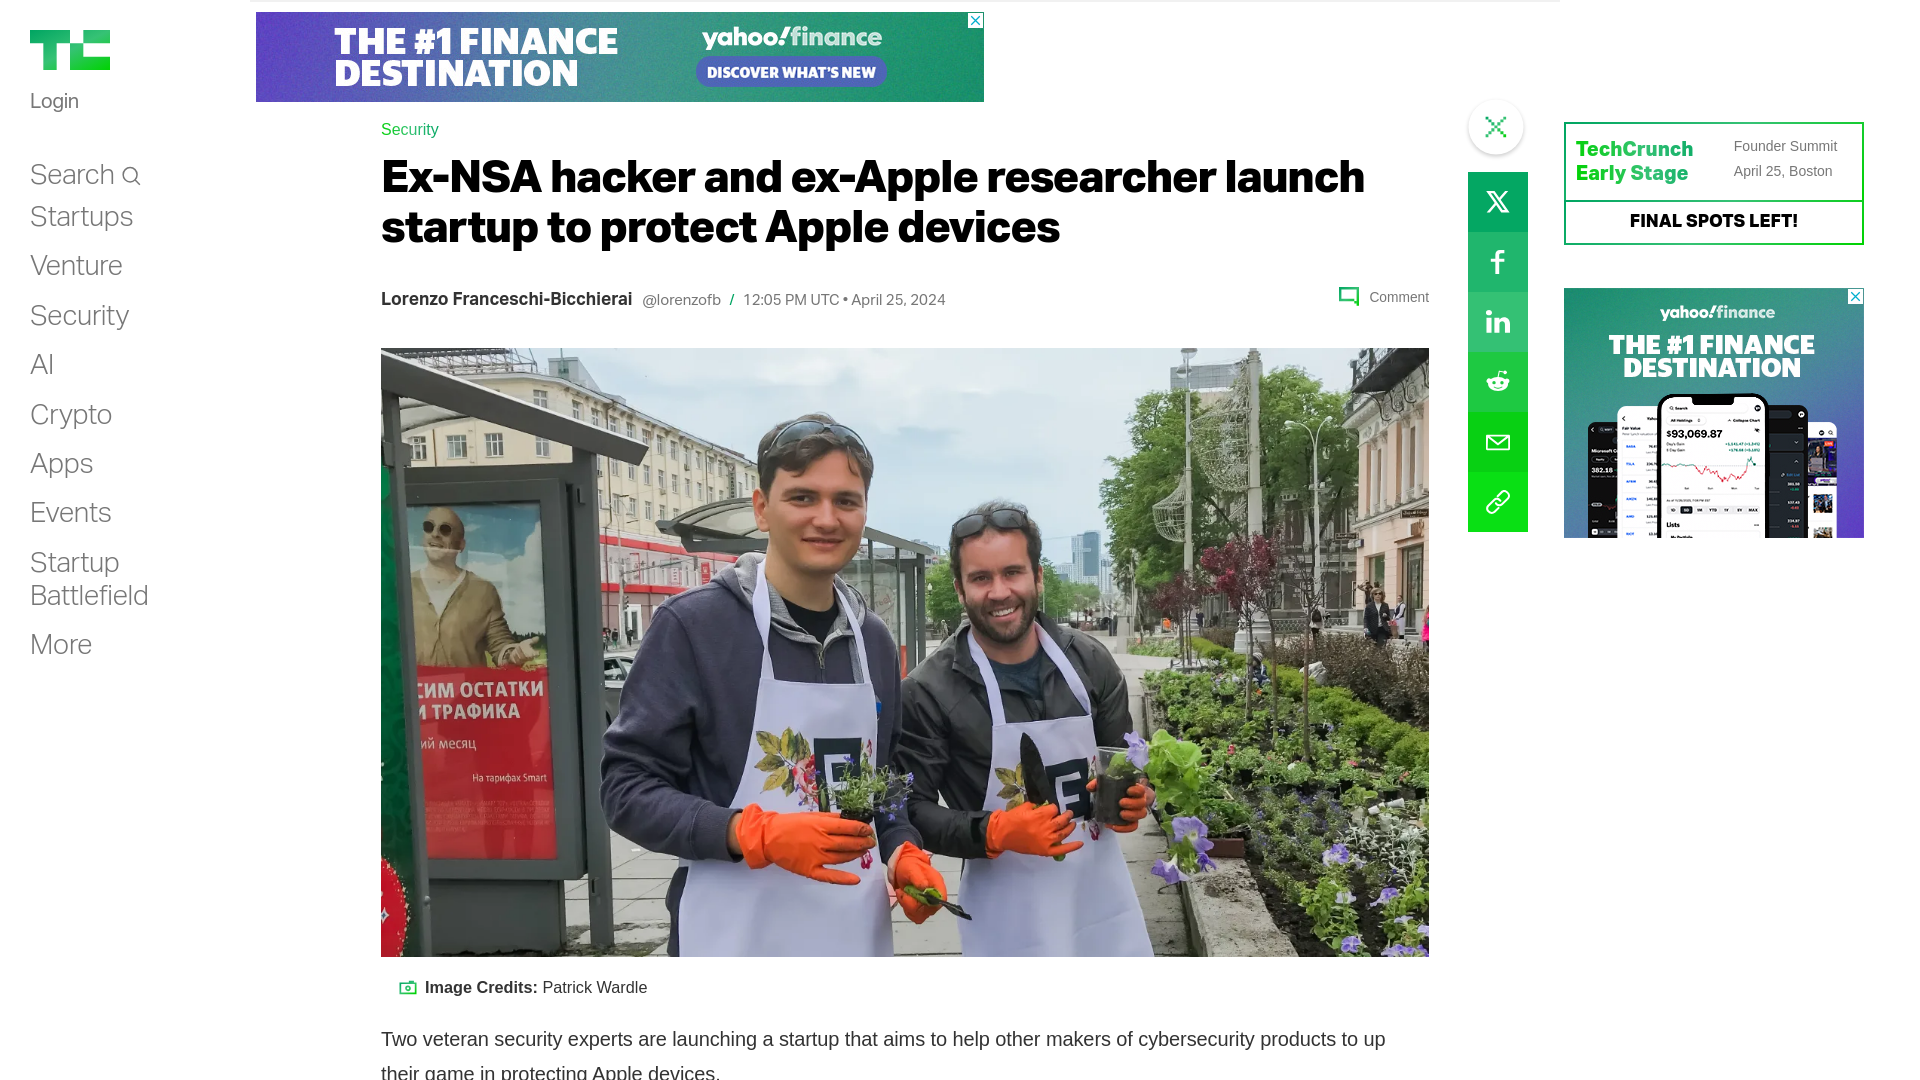 Ex-NSA hacker and ex-Apple researcher launch startup to protect Apple devices | TechCrunch